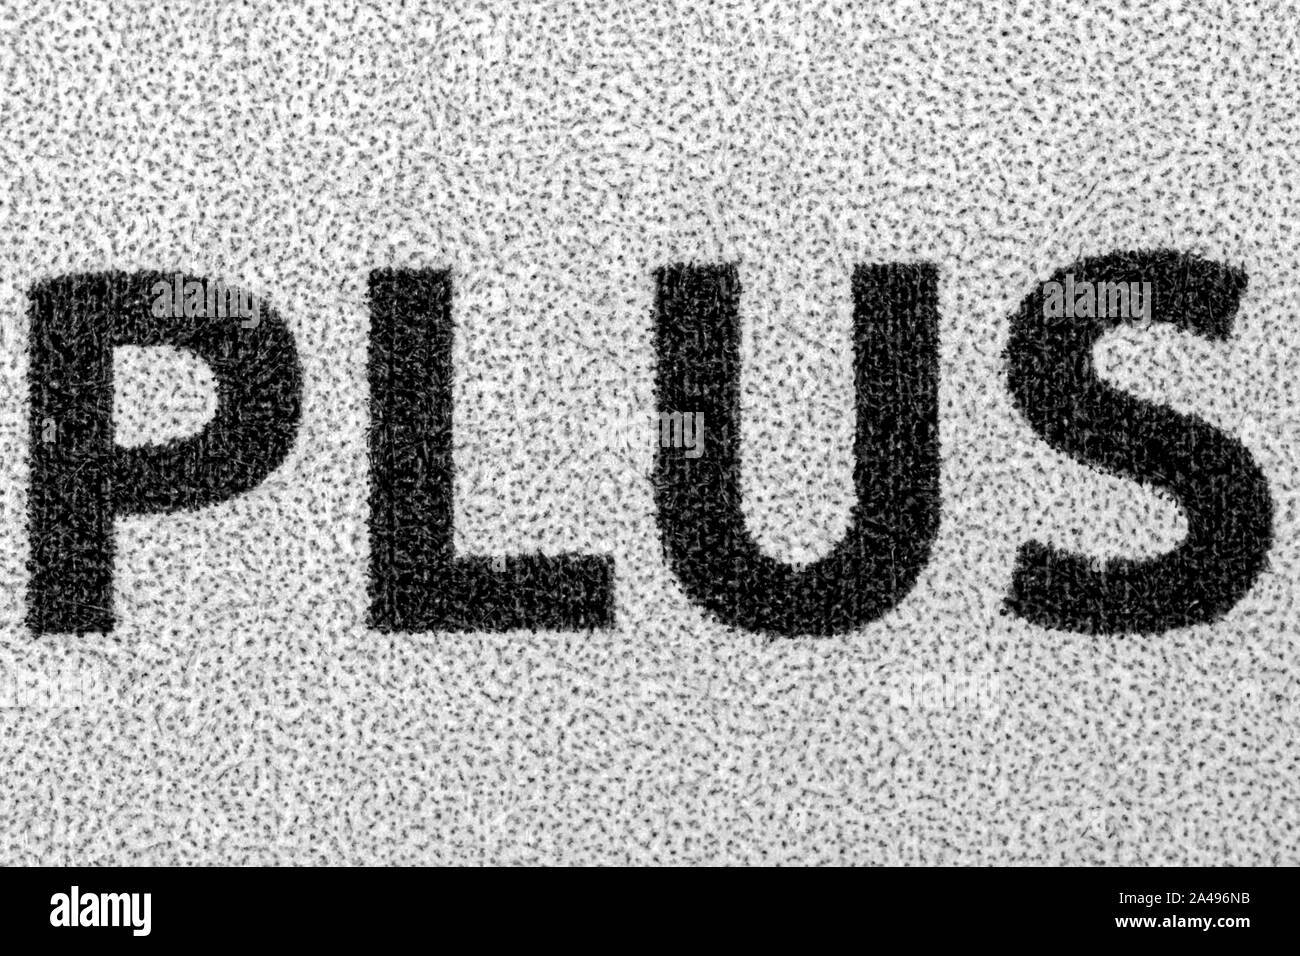 the word Plus written in capital letters on white background extreme close up Stock Photo